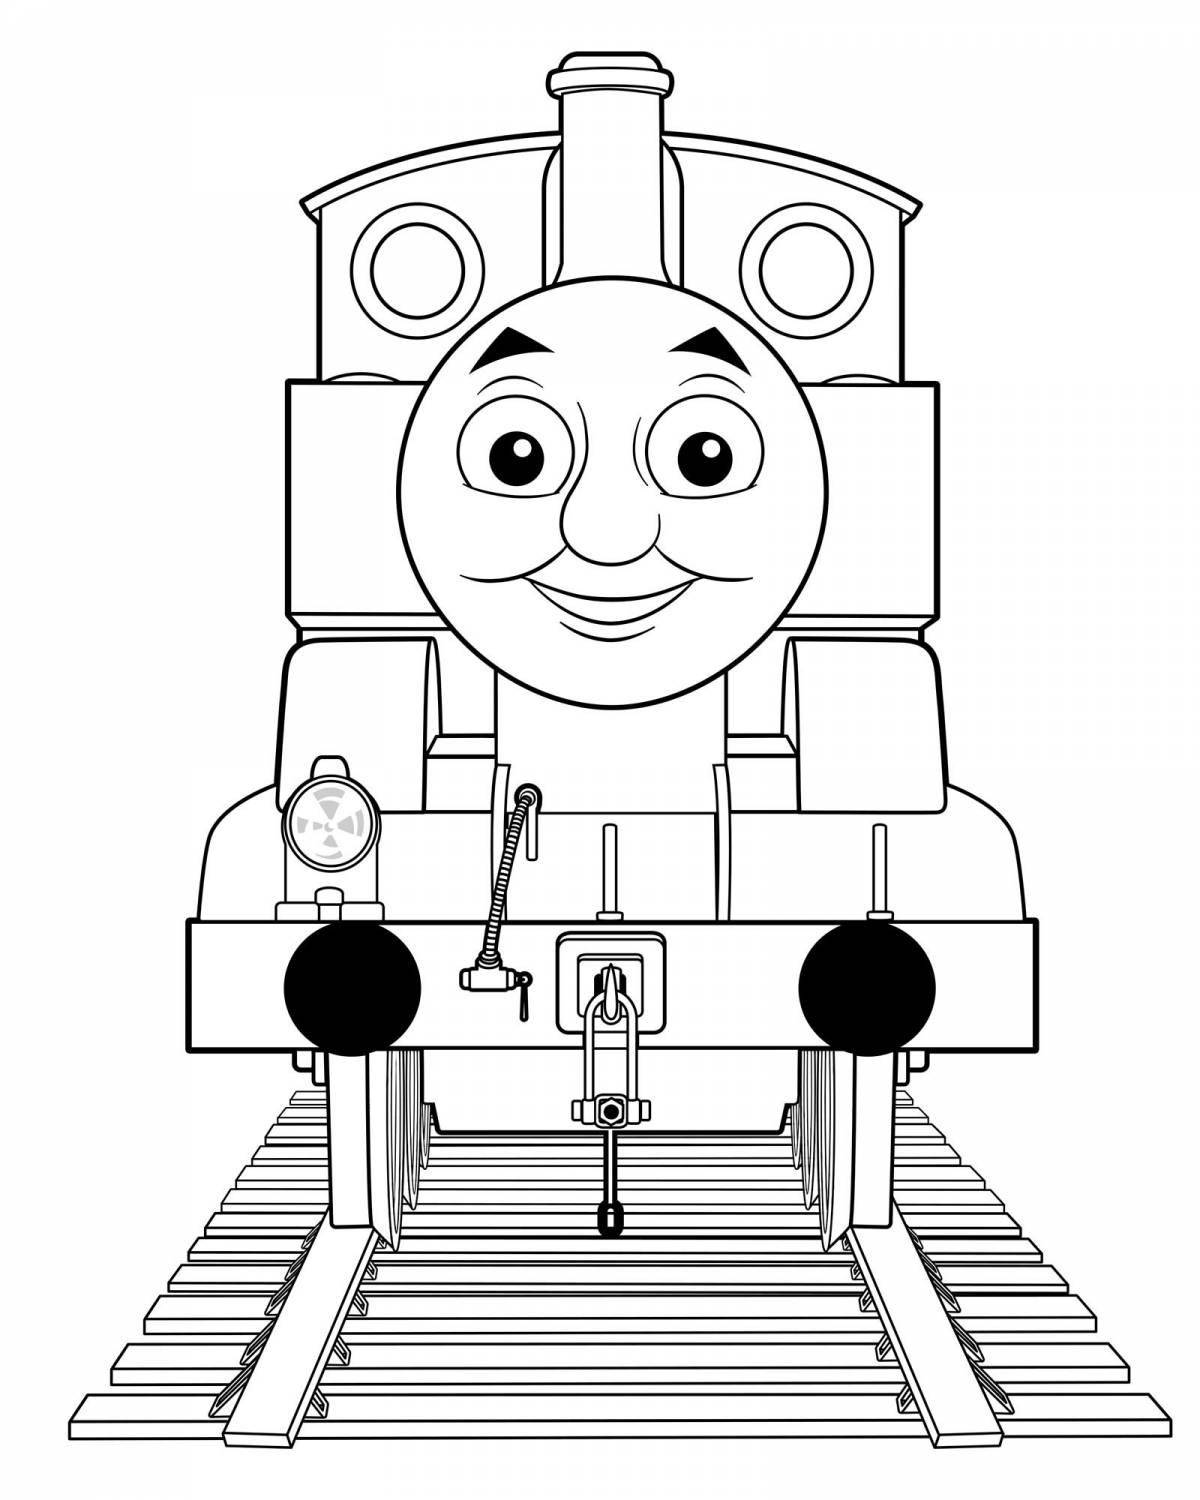 Great spider train coloring page